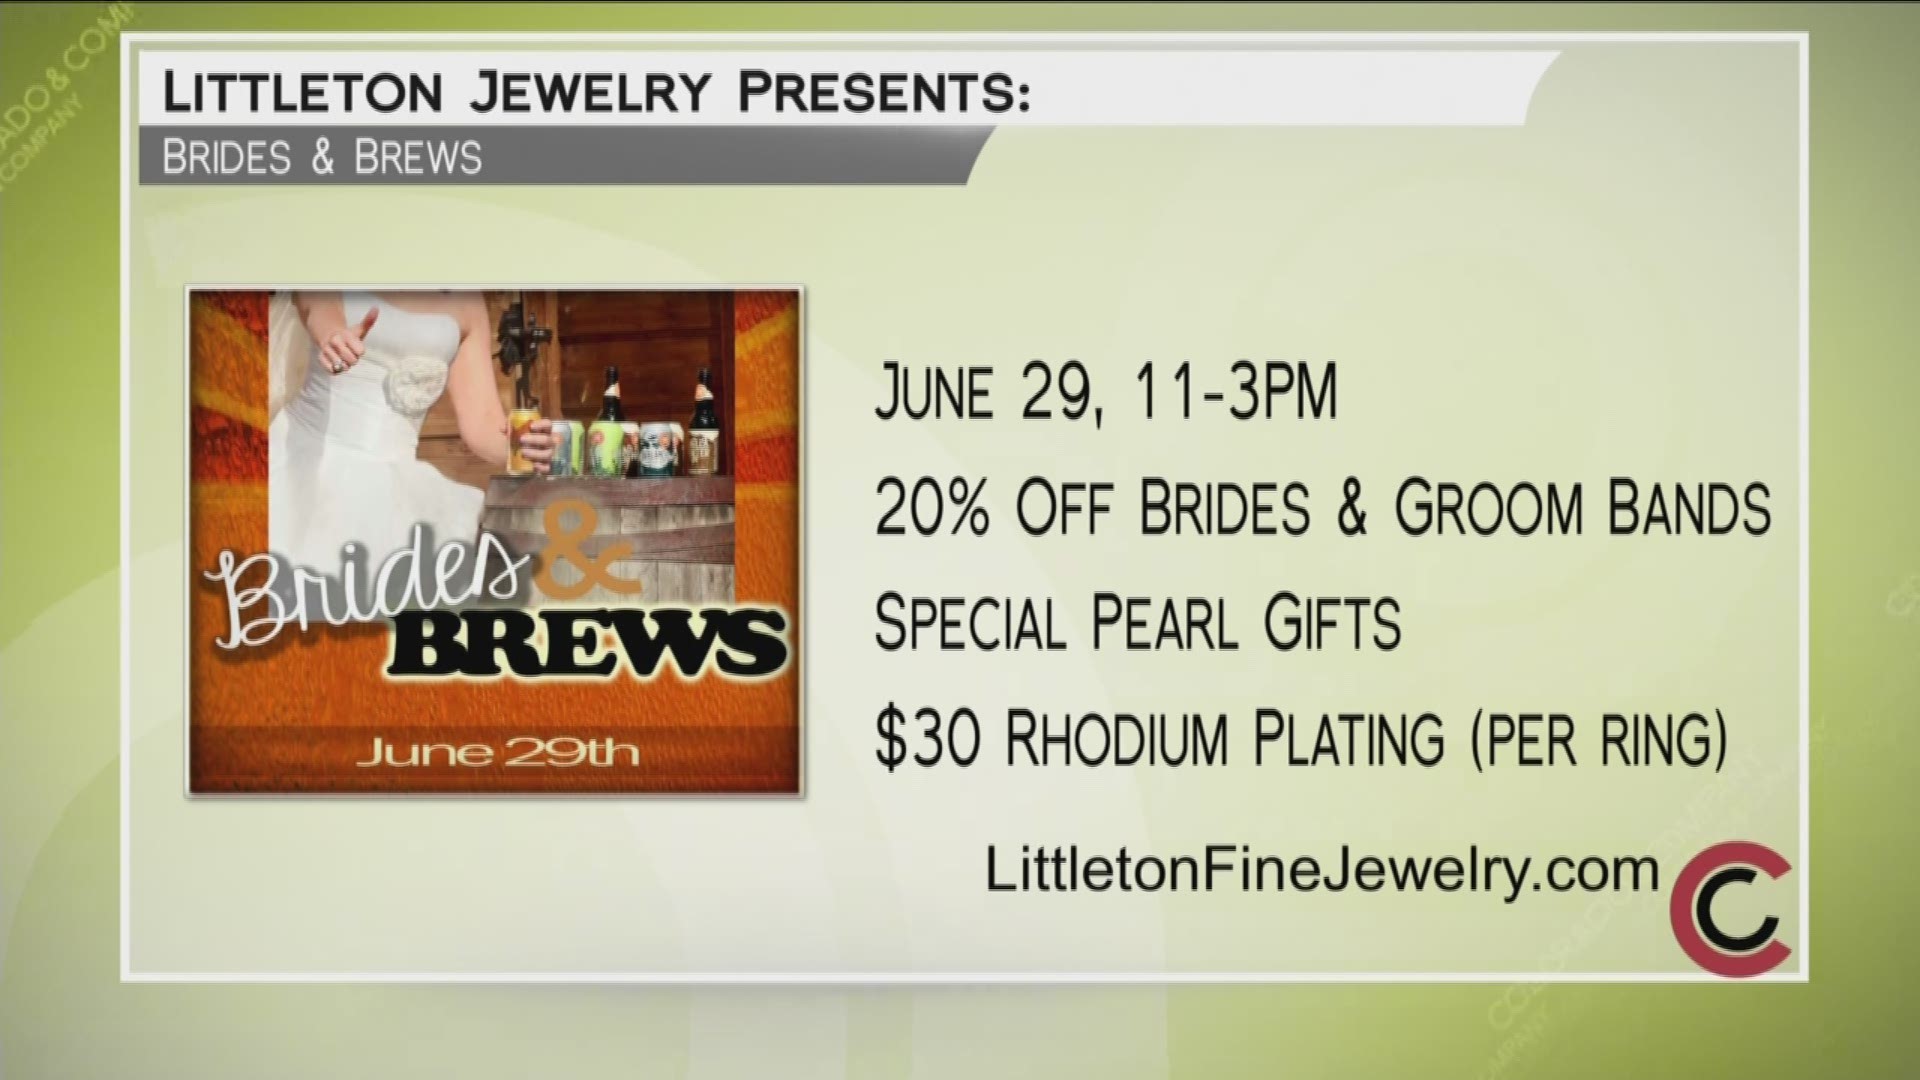 Get wedding-ready with Littleton Jewelry and Breckenridge Brewery on June 29th at Brides and Brews. Event specials include 20% off bride and groom wedding bands, special bridesmaid gifts and $30 rhodium plating. Bring your bridal party to Littleton Jewelry for an afternoon of giveaways, beer and fun. Learn more about Littleton Jewelry at www.LittletonFineJewelry.com. 
THIS INTERVIEW HAS COMMERCIAL CONTENT. PRODUCTS AND SERVICES FEATURED APPEAR AS PAID ADVERTISING.